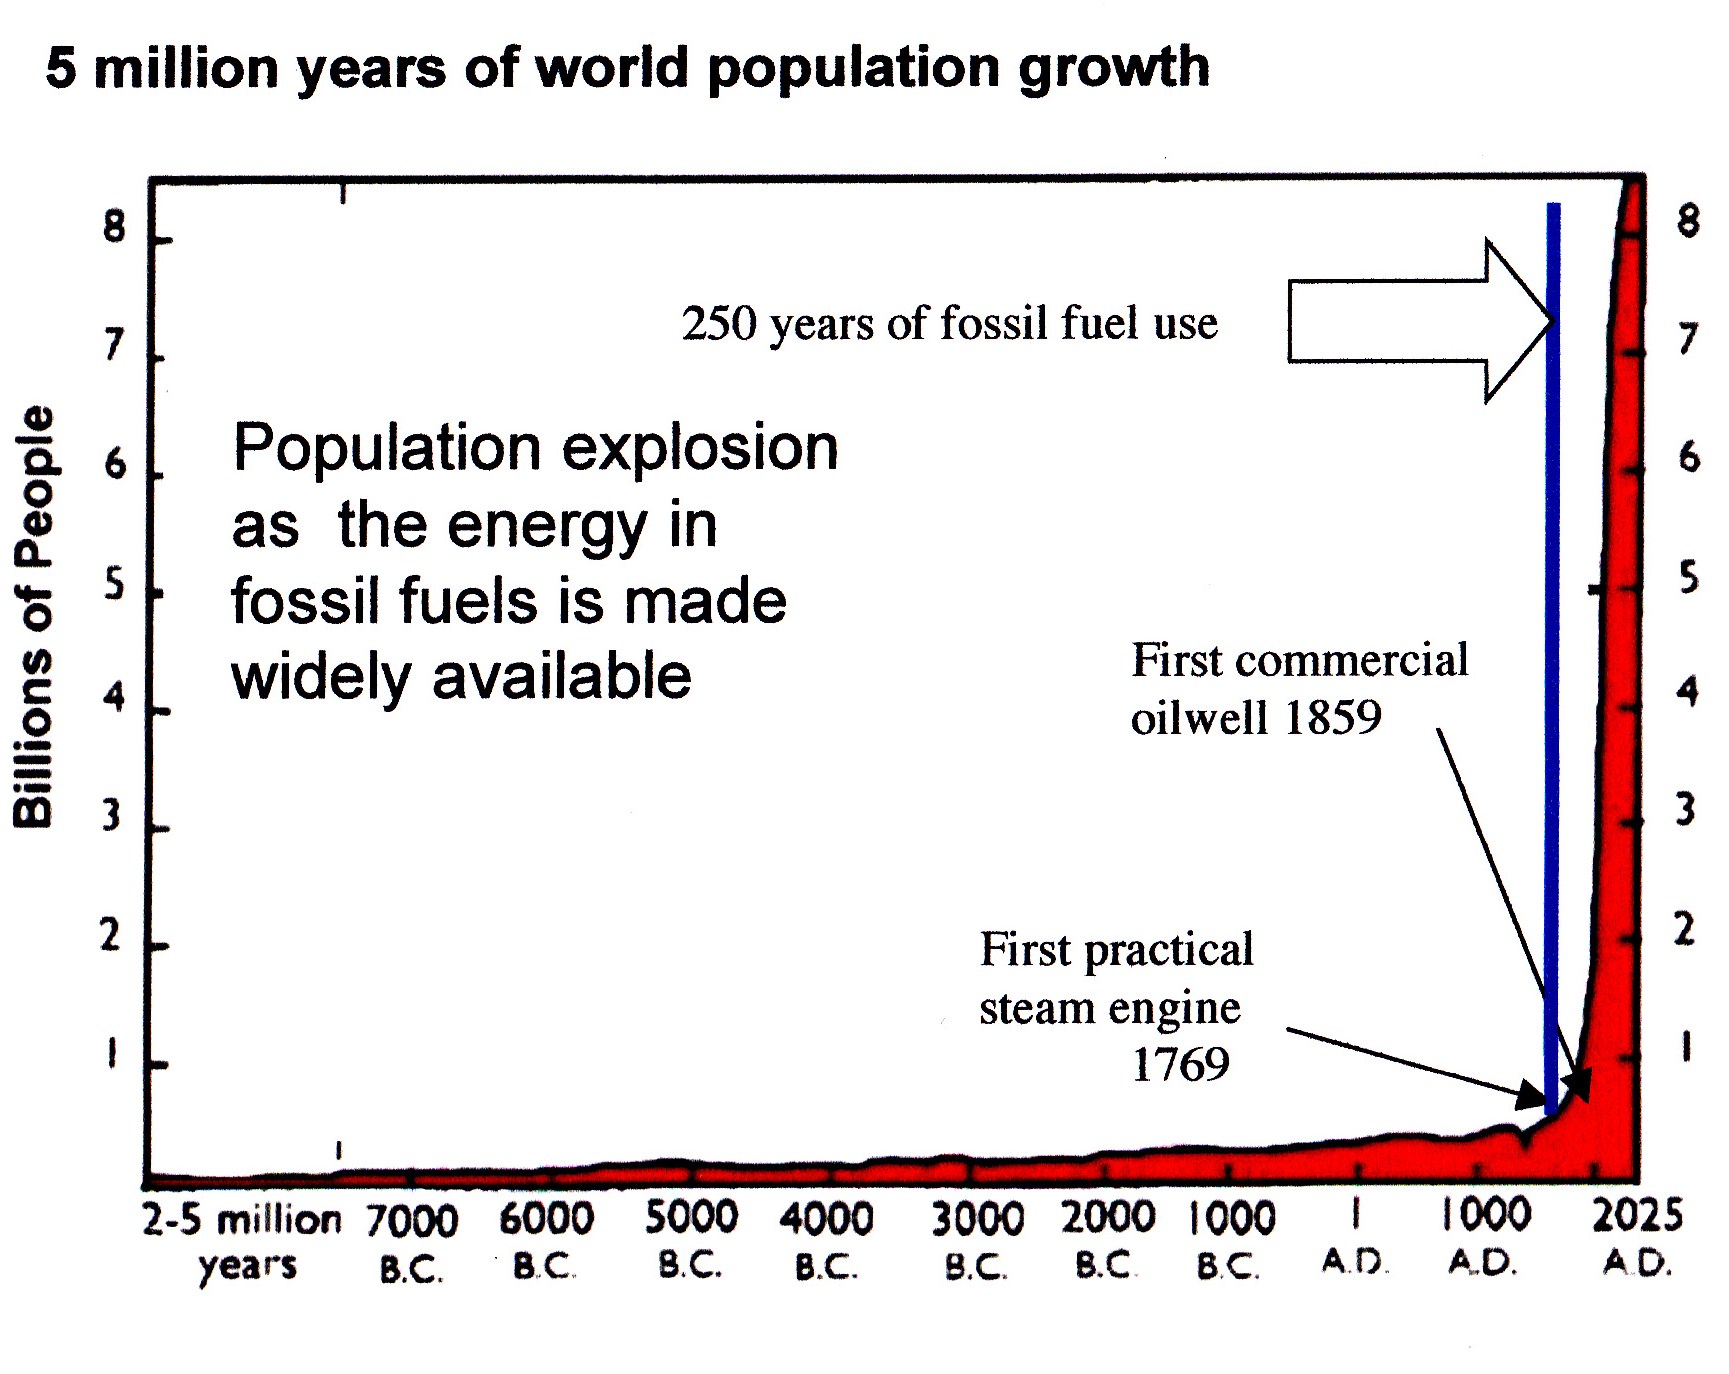 5 million years of population growth graph